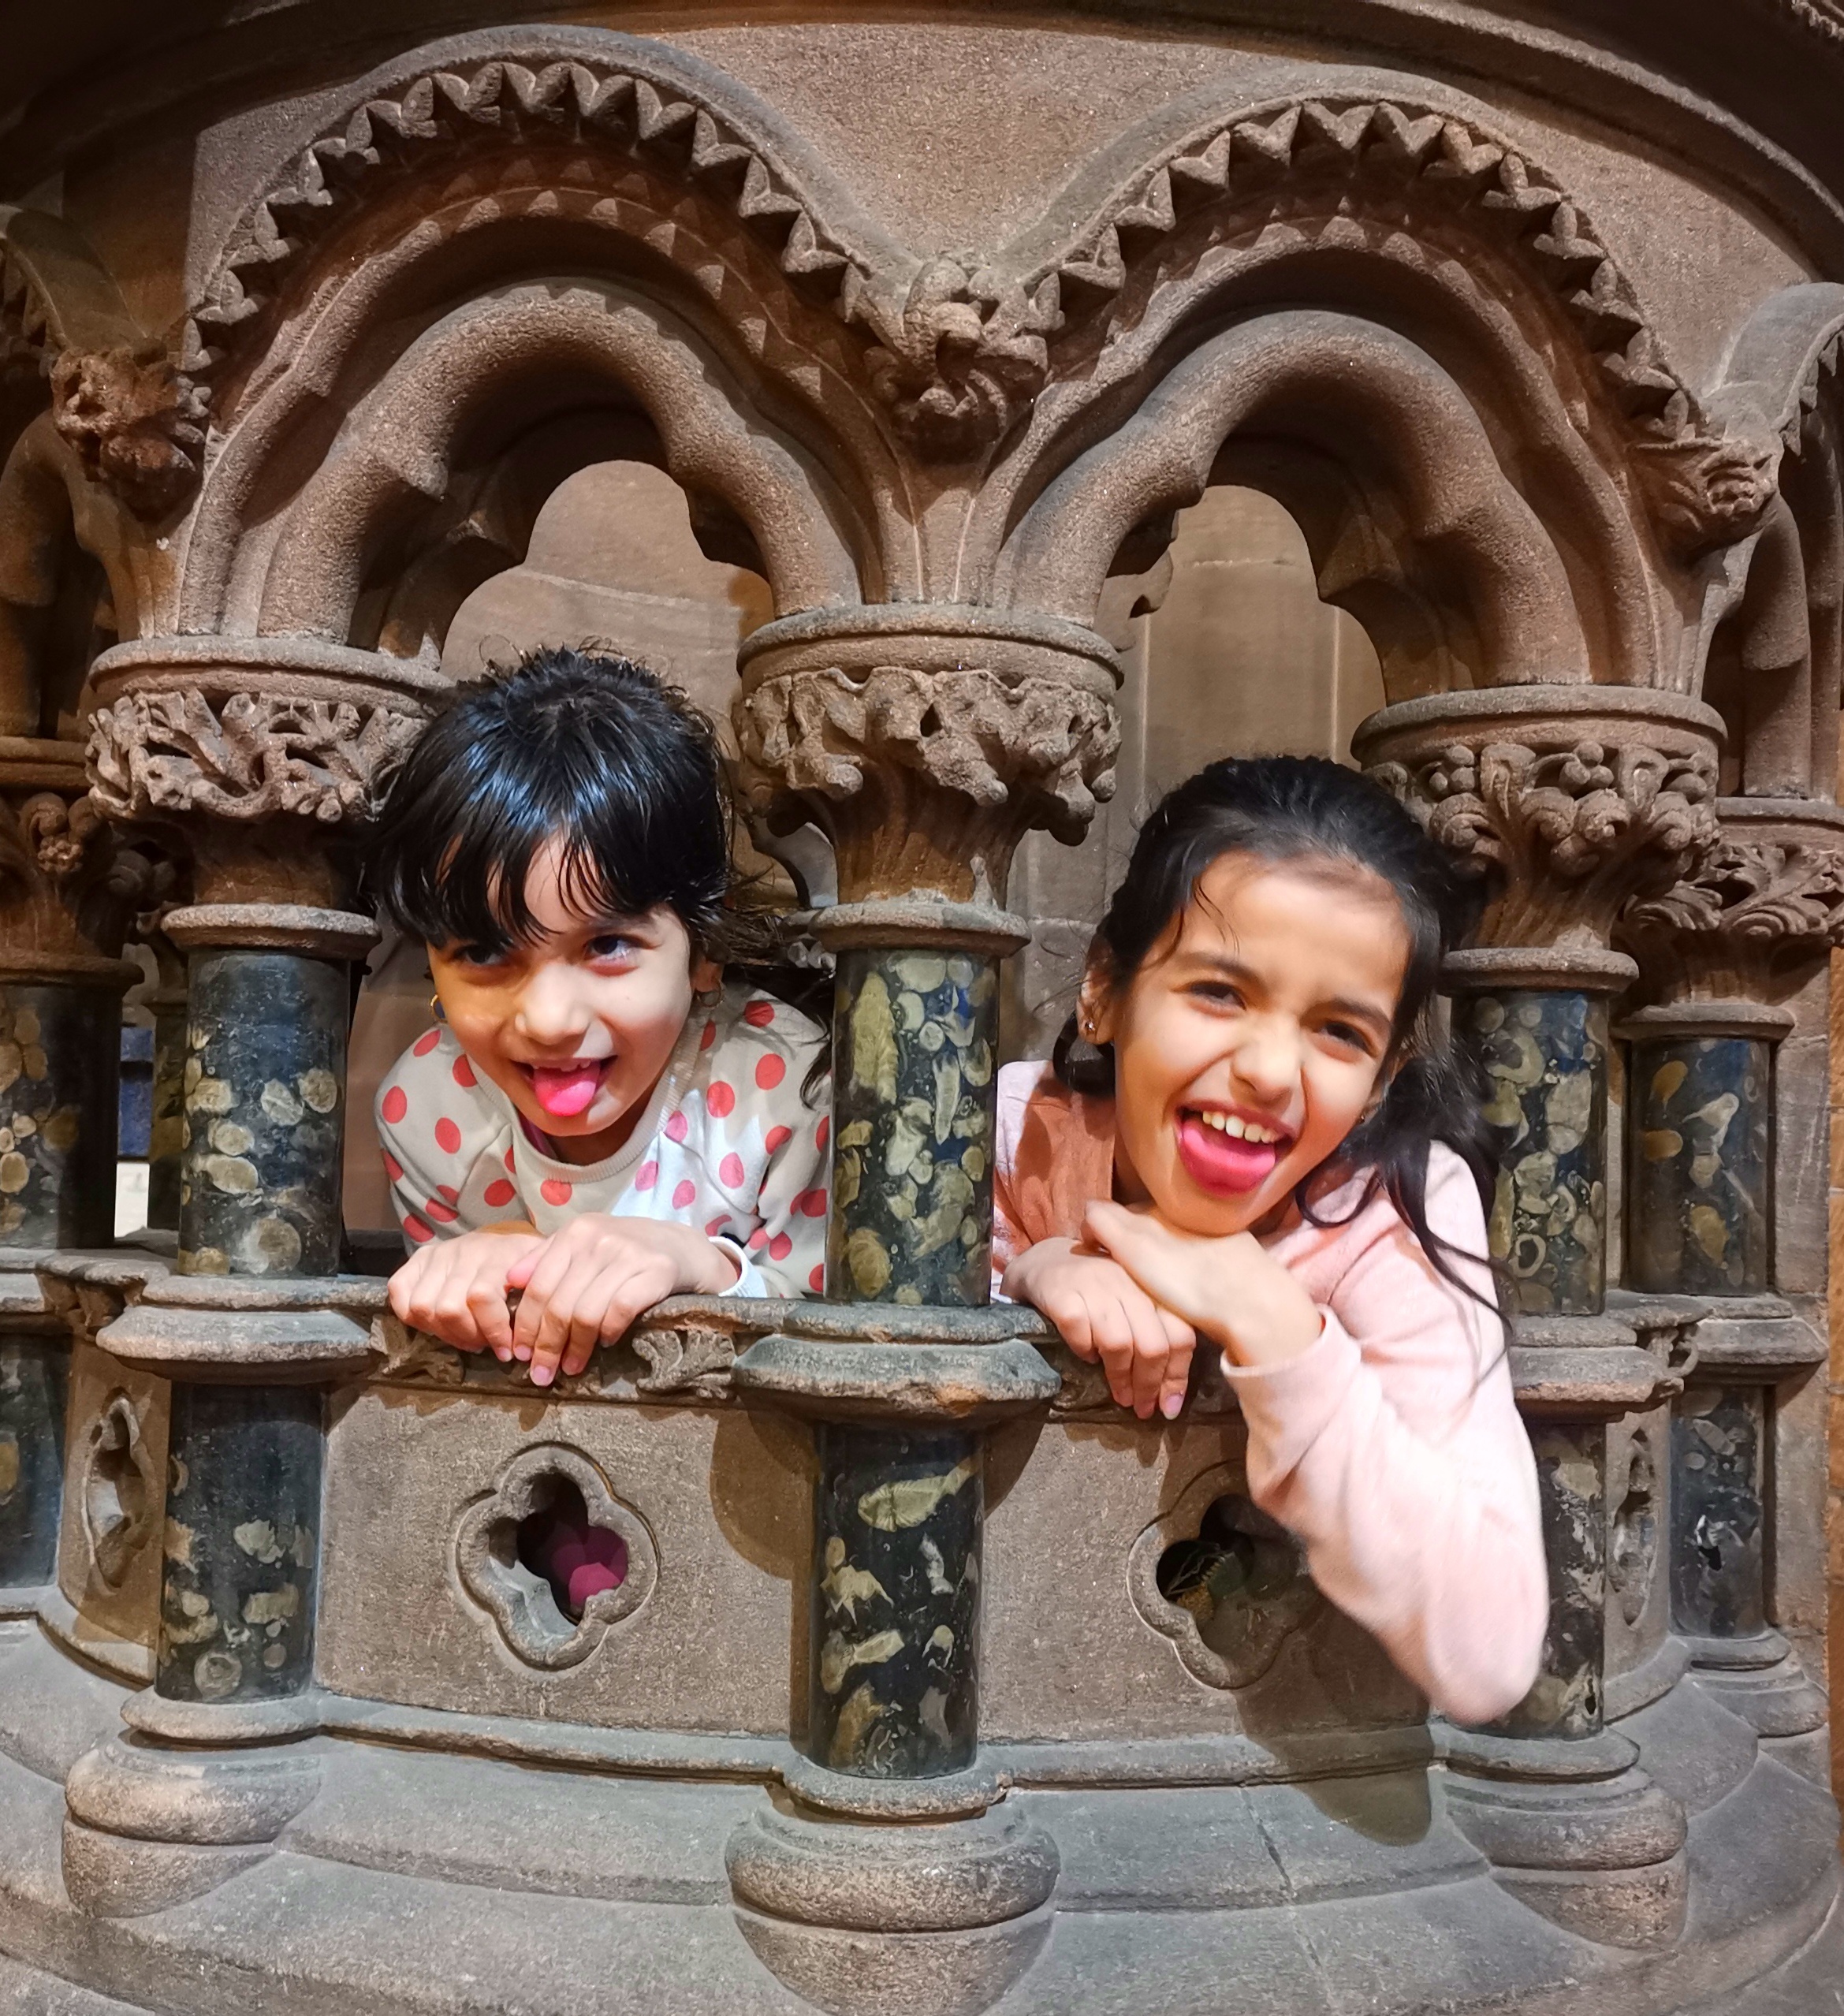 Fatima and Firoza Tanha were inspired the gargoyles in Chester Cathedral.